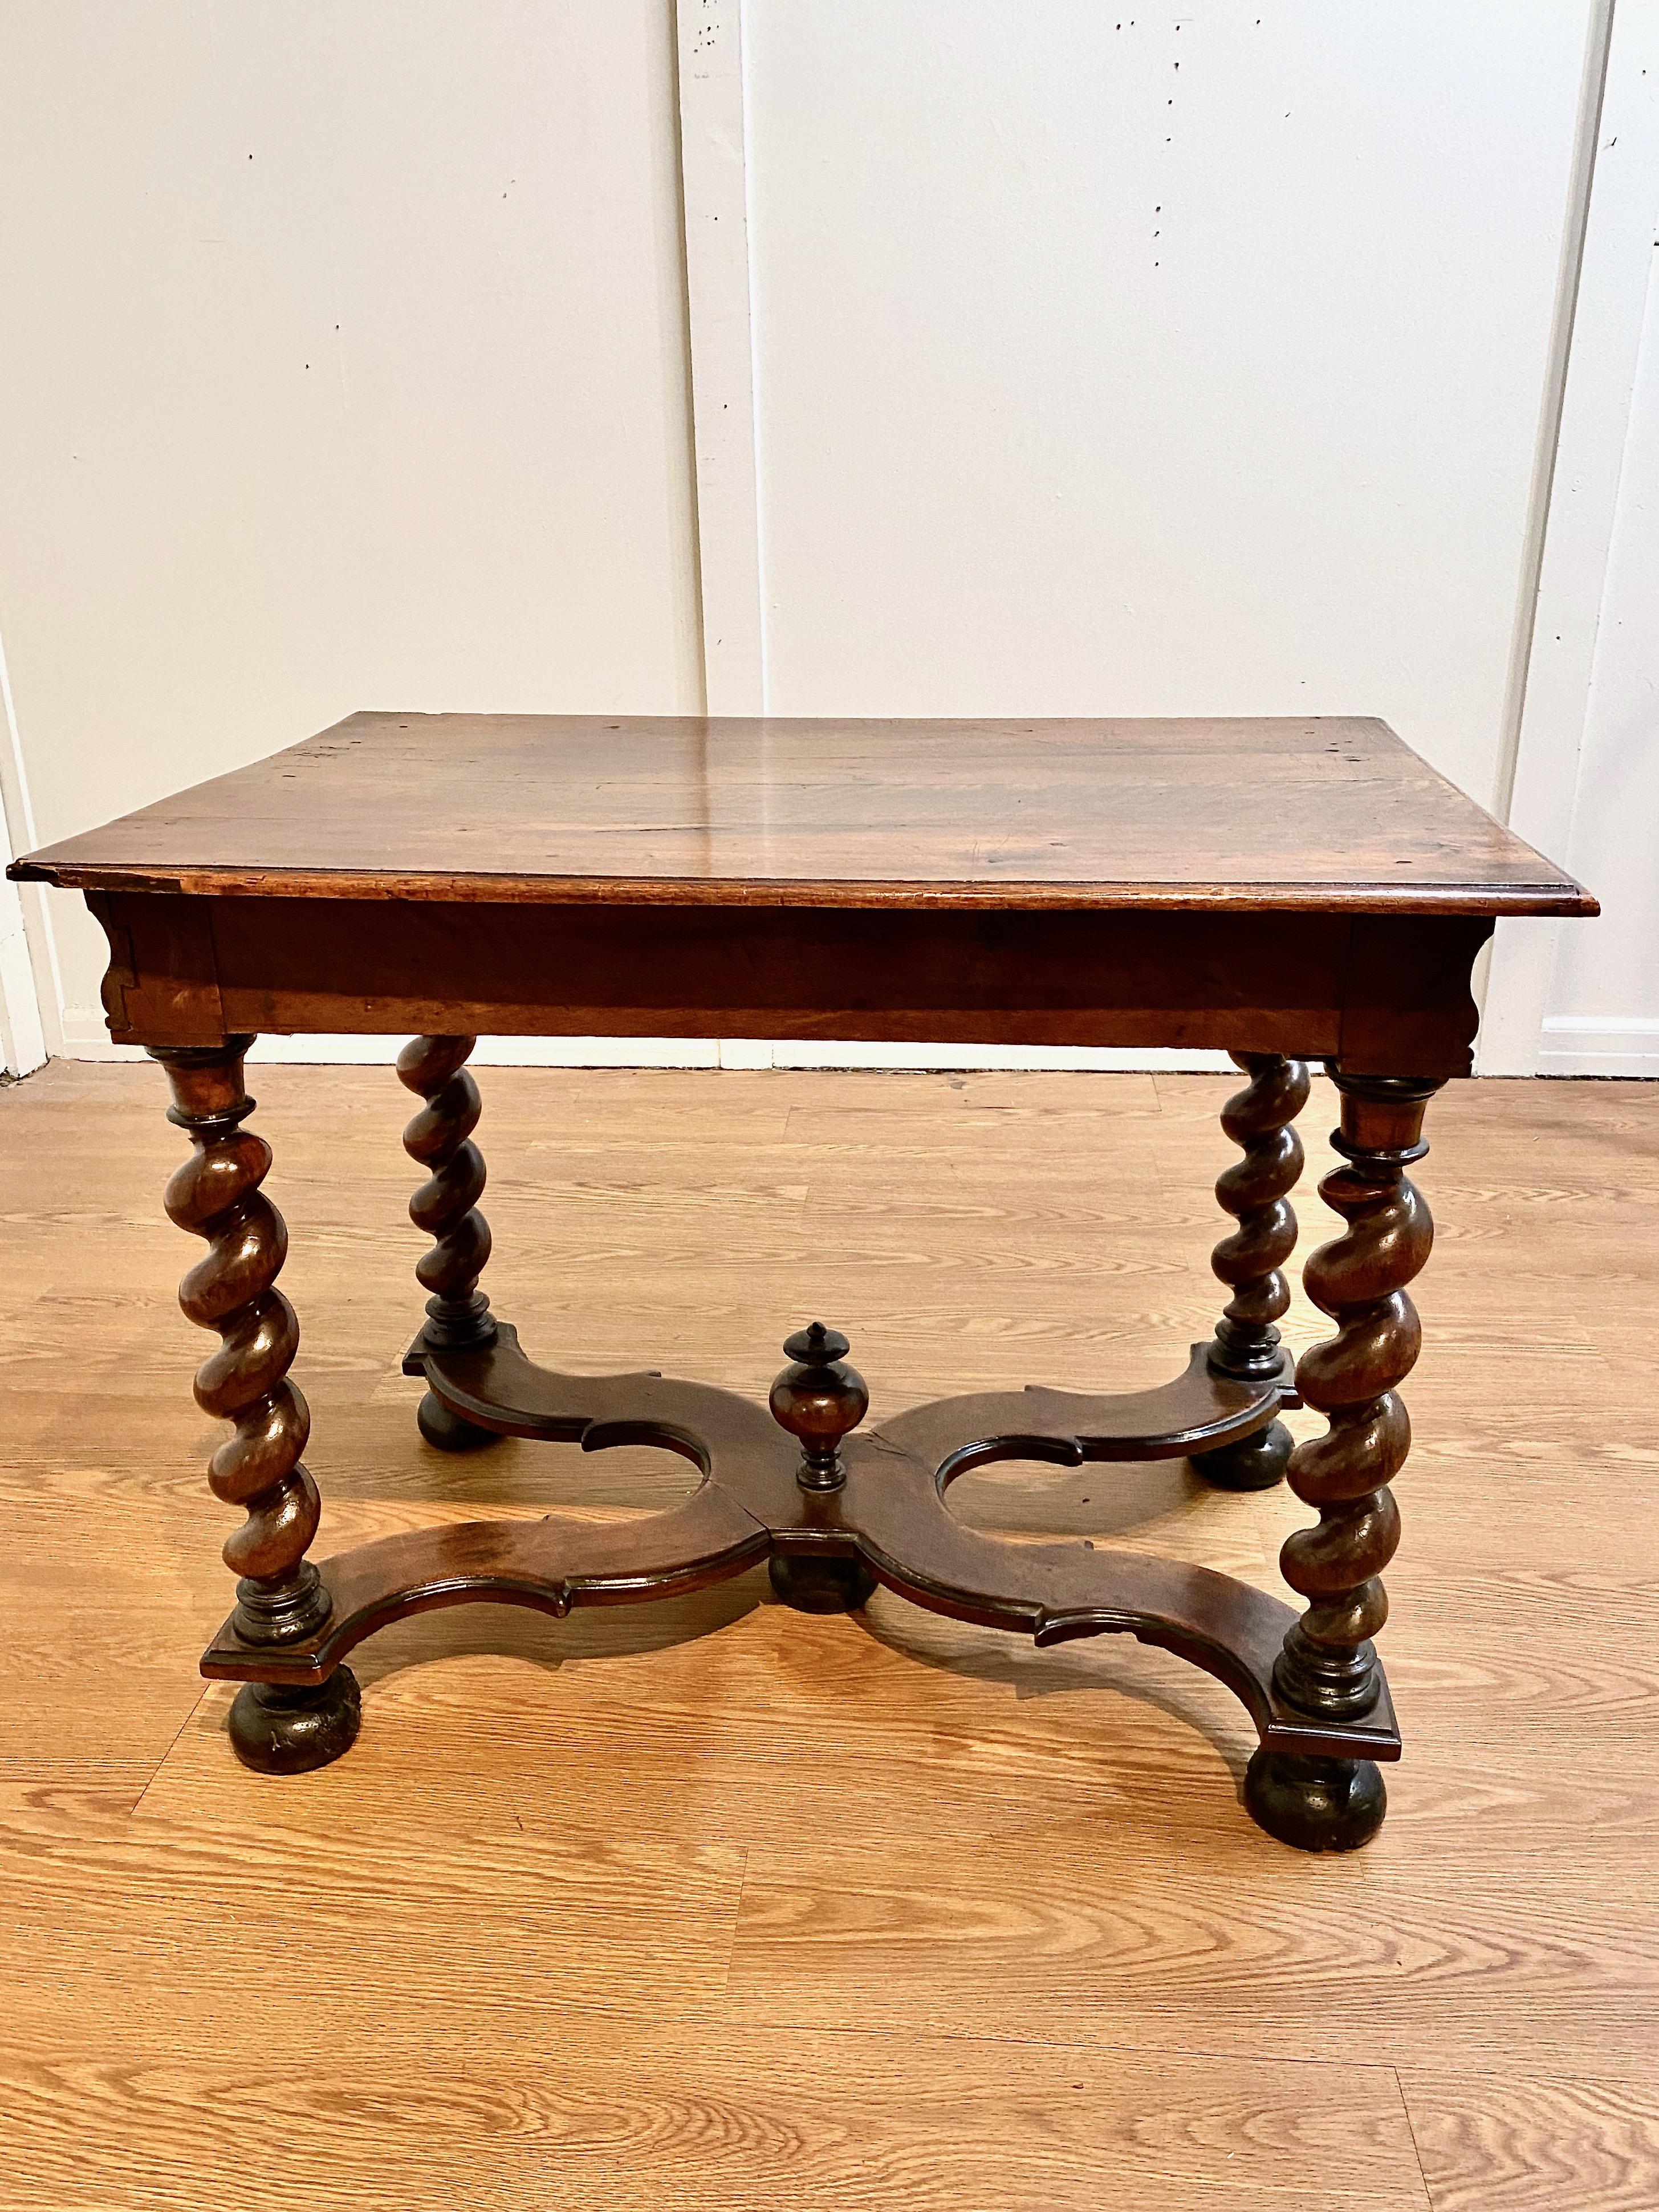 This is a superb example of a late 17th century Franco-Flemish period Louis XIV side table or writing table. The table is in original condition with an old multi-layer waxed surface. The two board walnut top is supported by beefy, but elegant and